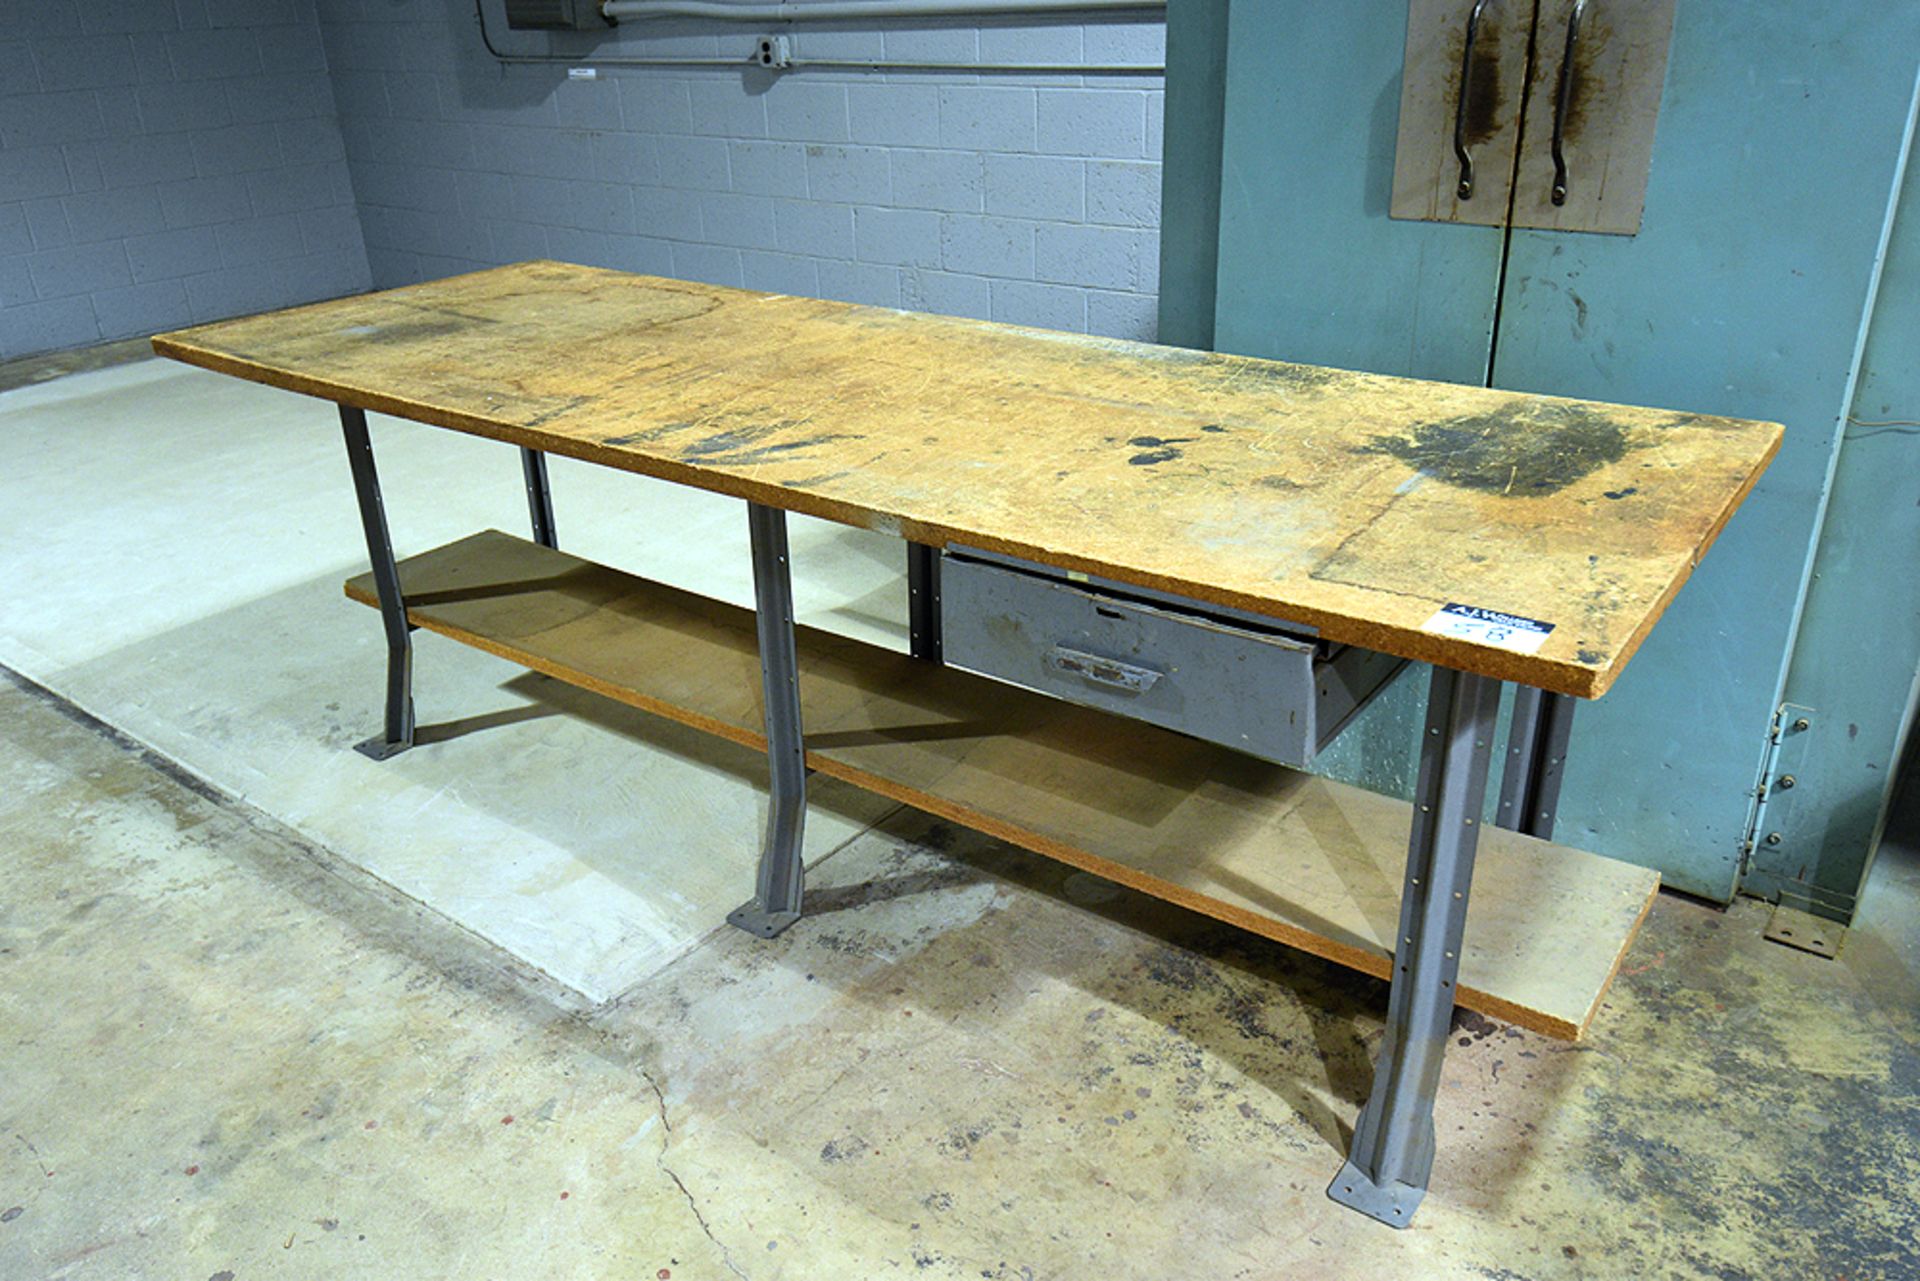 Forman's Desk & Work Benches - Image 2 of 3